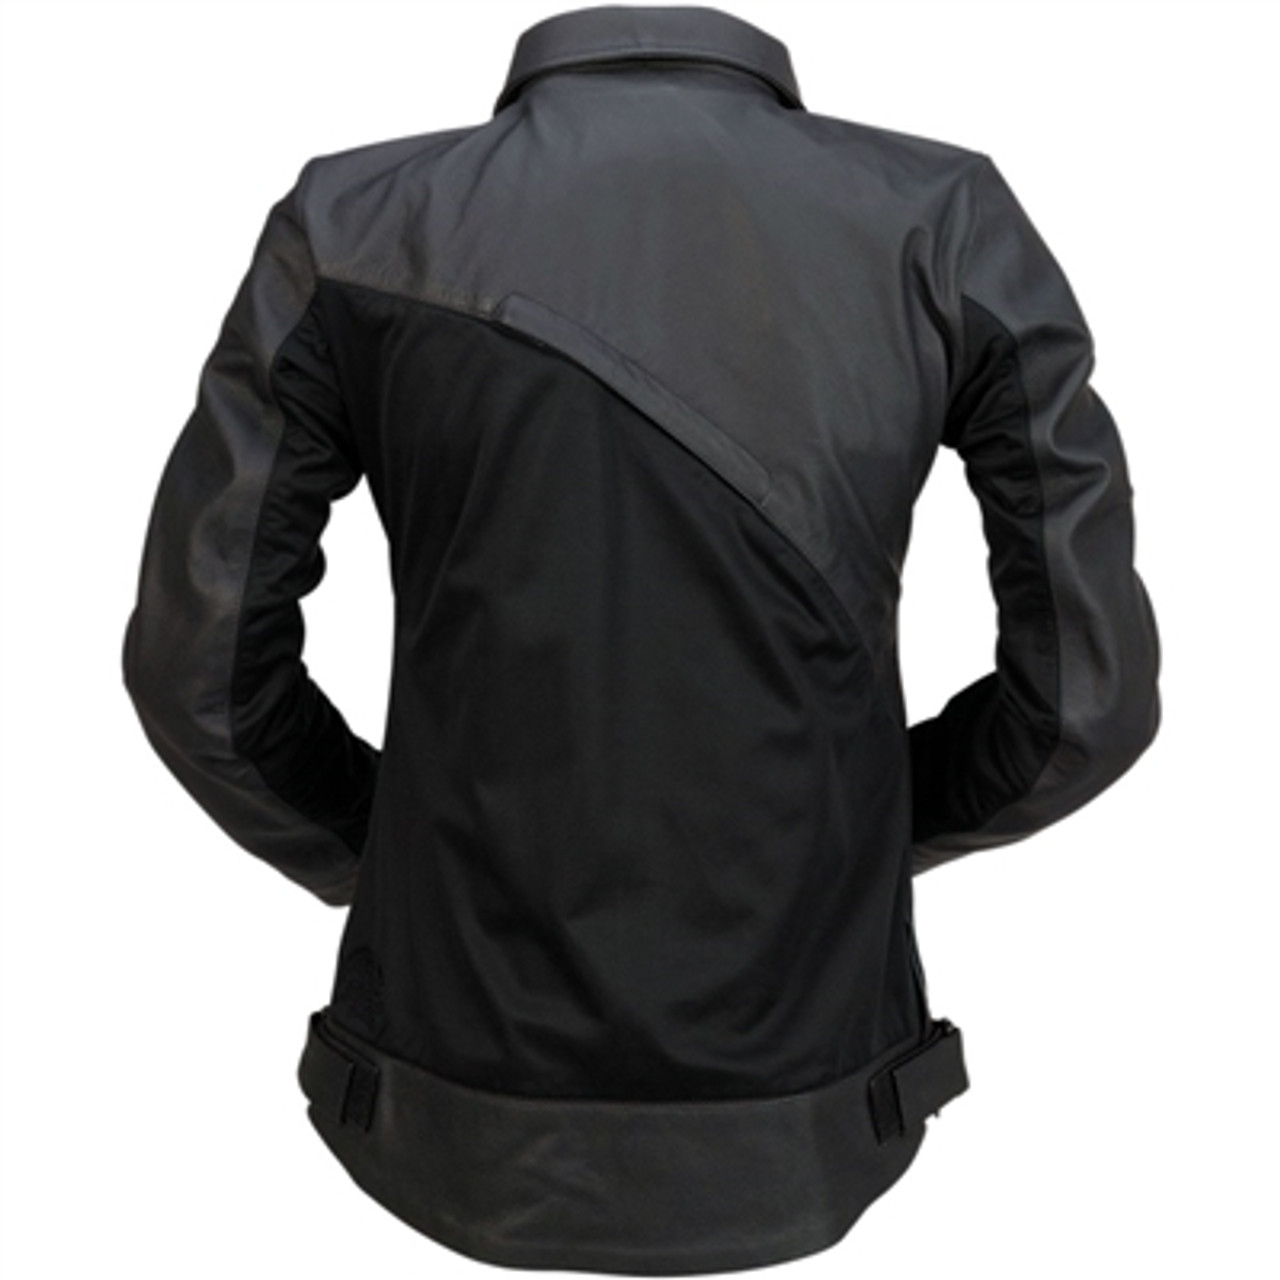 Z1R Womens Elysia Leather Jacket Black available at Motocross Giant